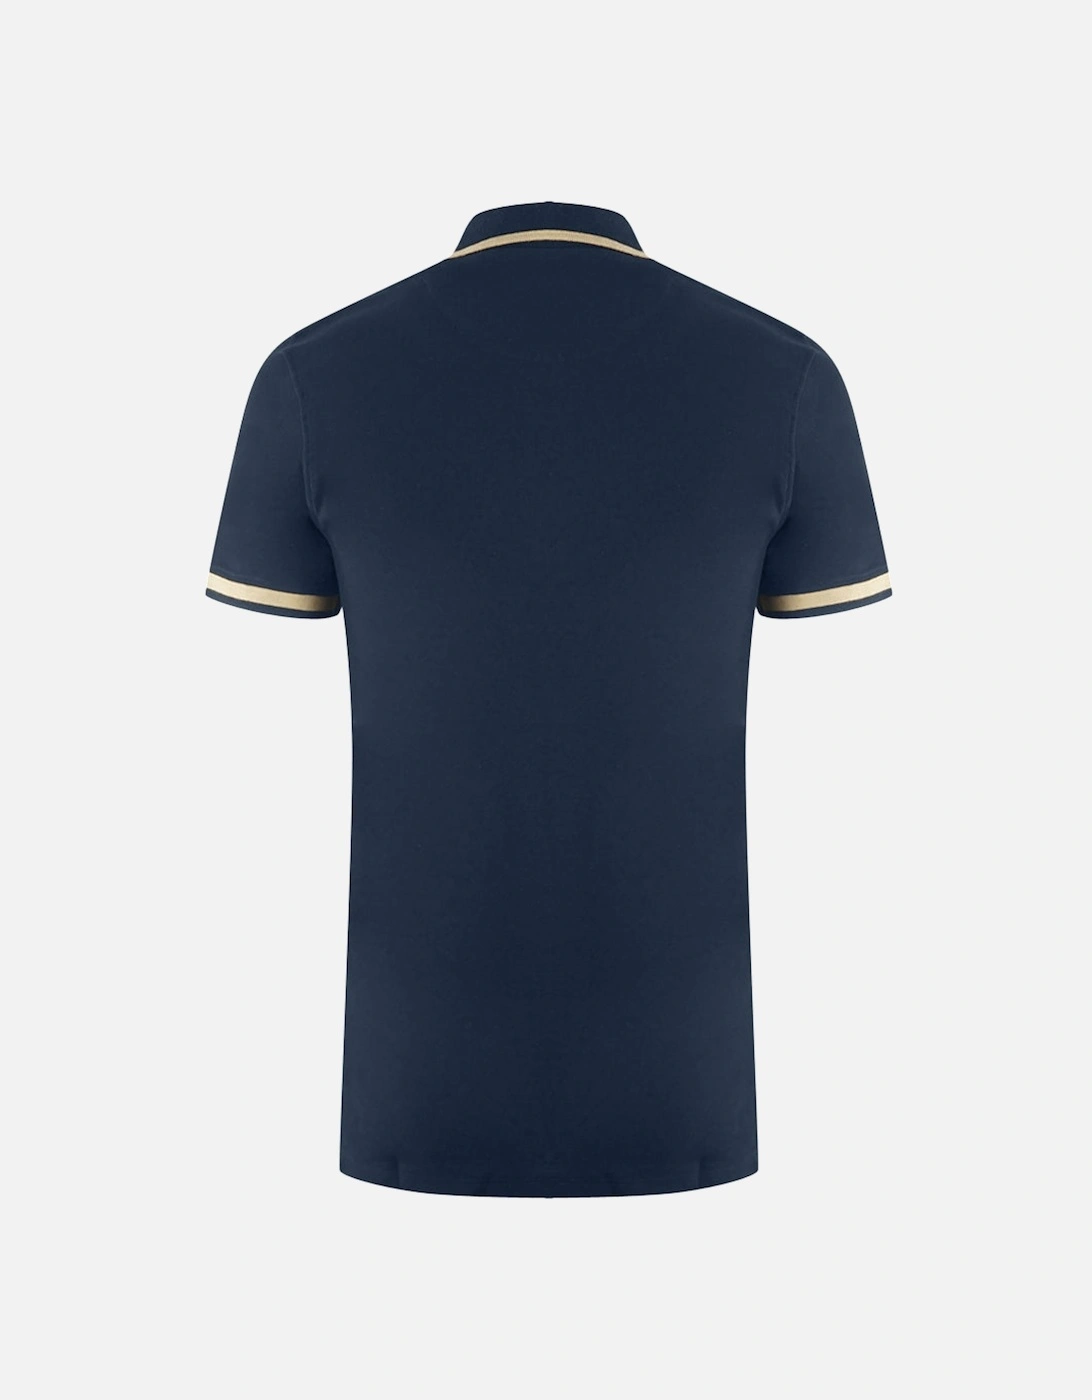 AQ 1851 Embroidered Tipped Navy Blue Polo Shirt